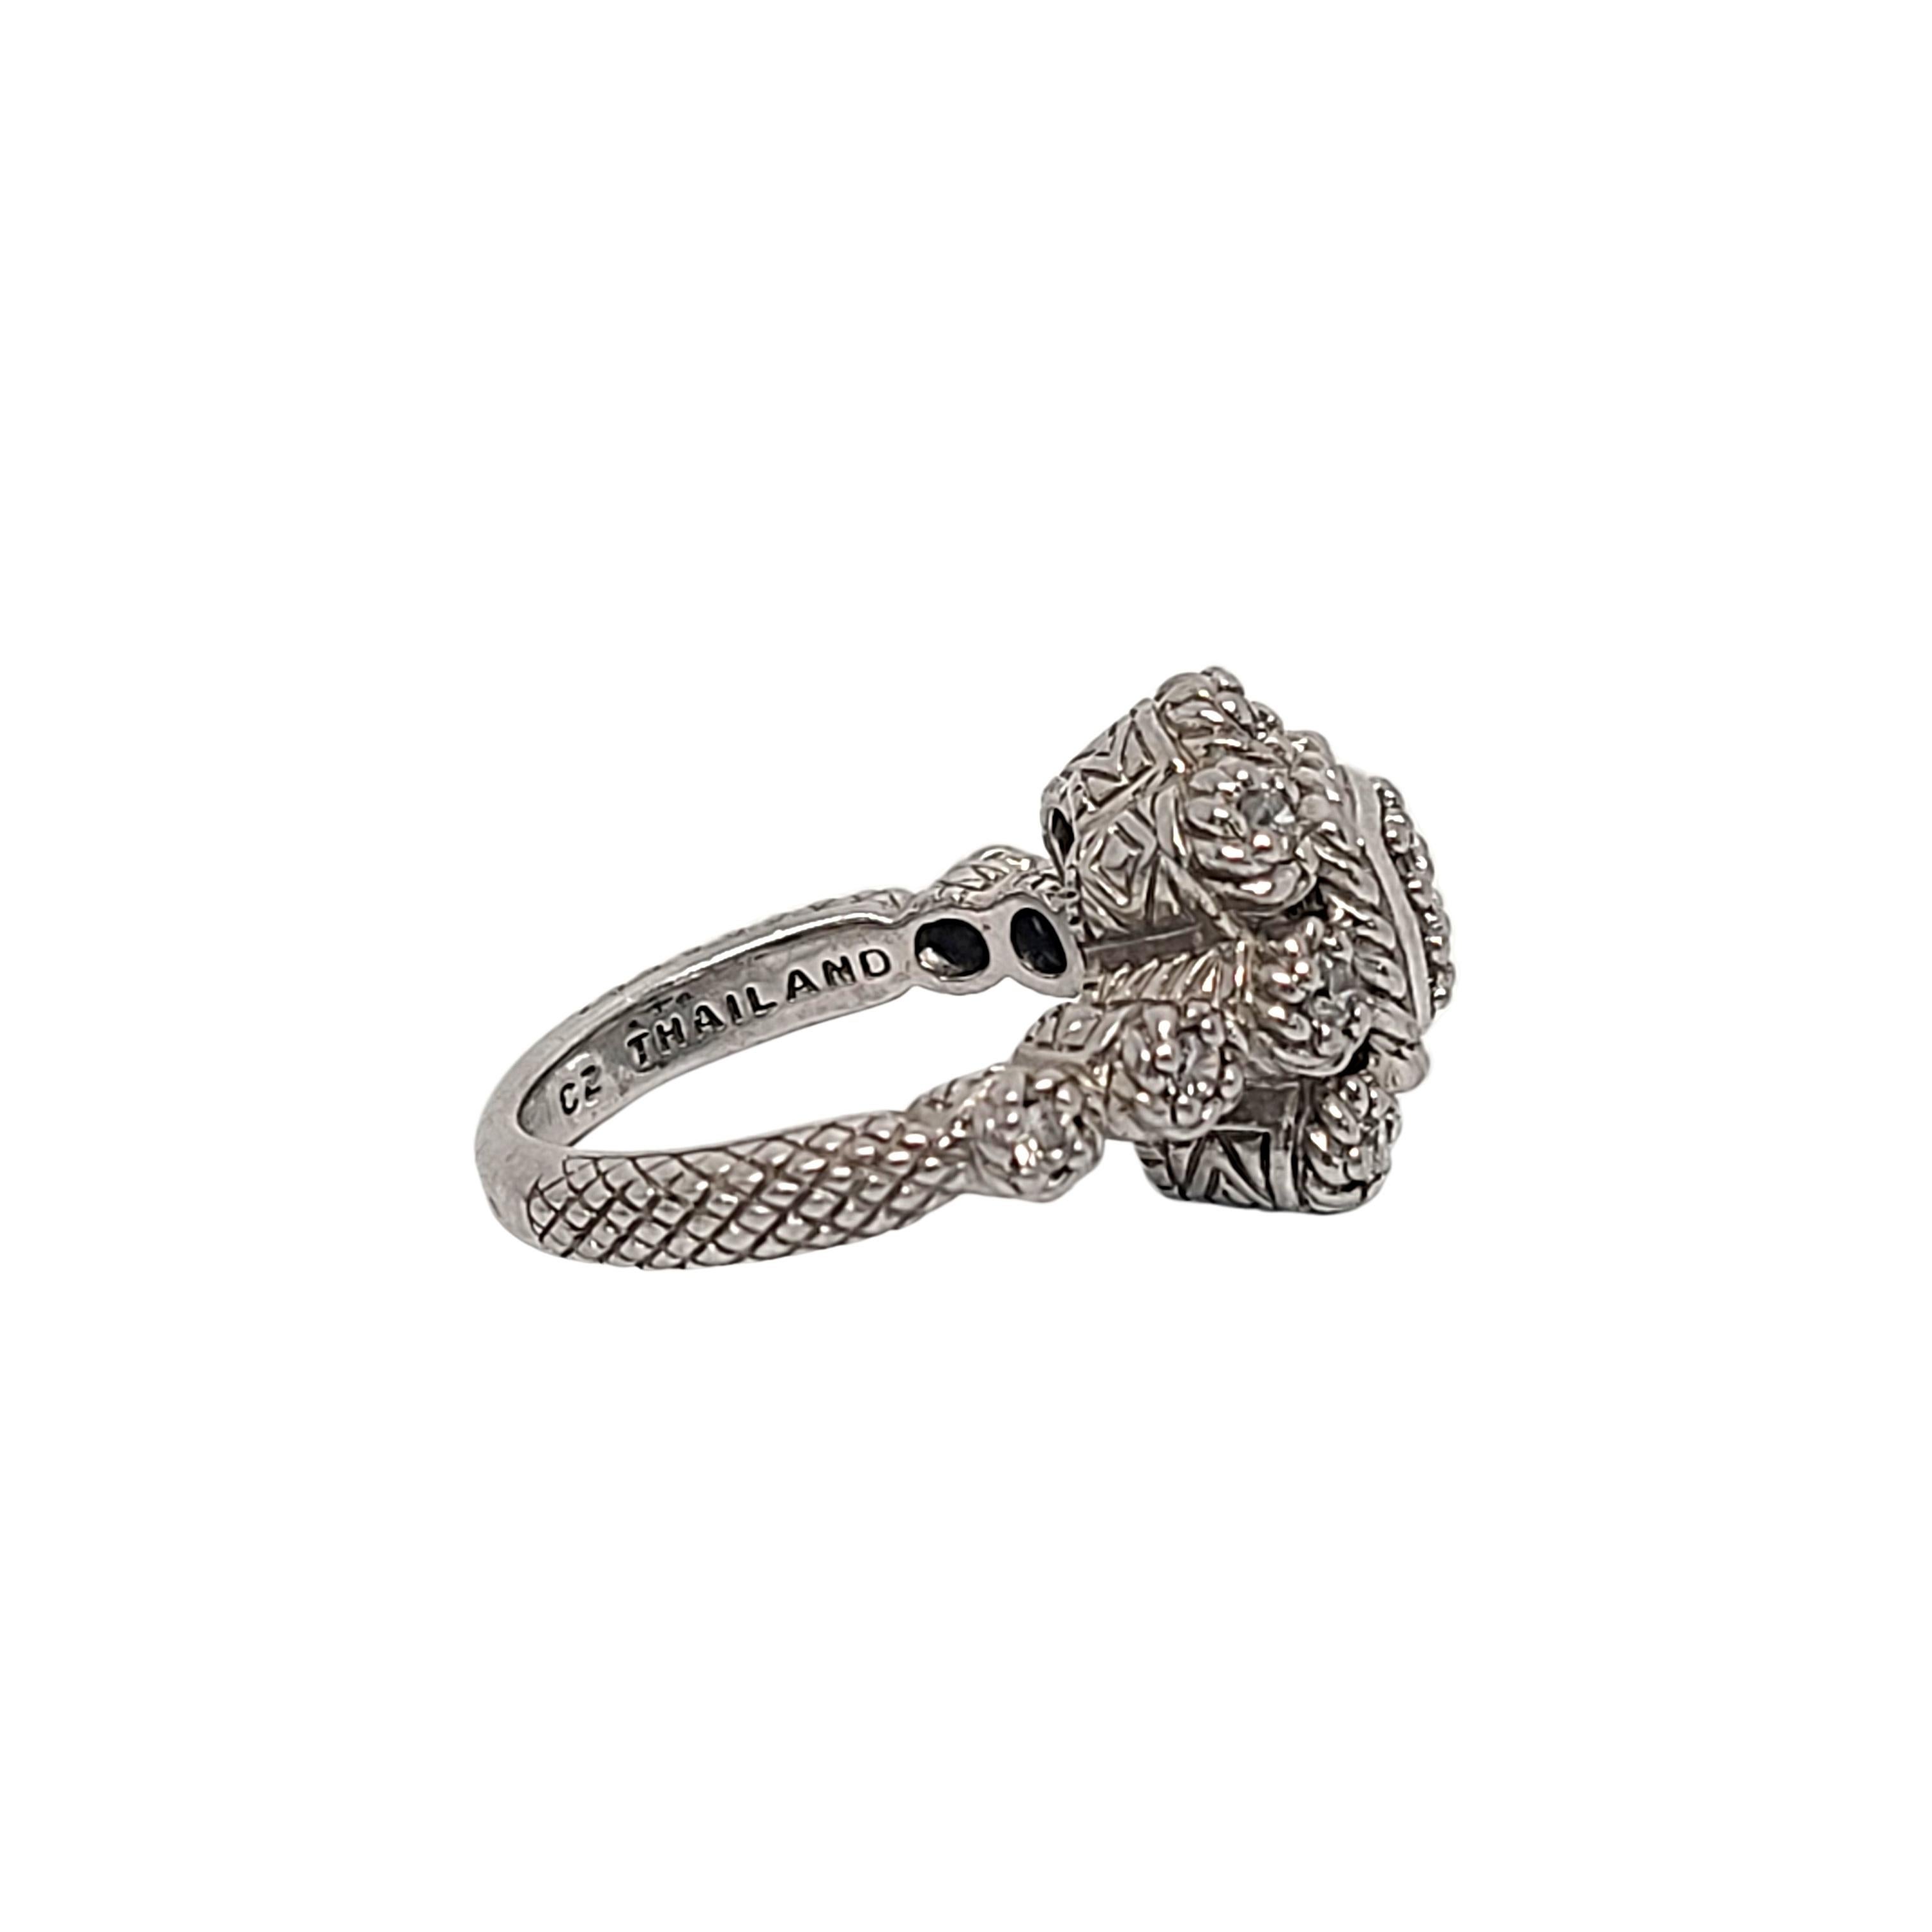 Sterling silver CZ flower cluster ring by designer Judith Ripka.

Size 7

This beautiful piece features textured design around a flower design with a cluster of CZs at its center and small CZs set in the 